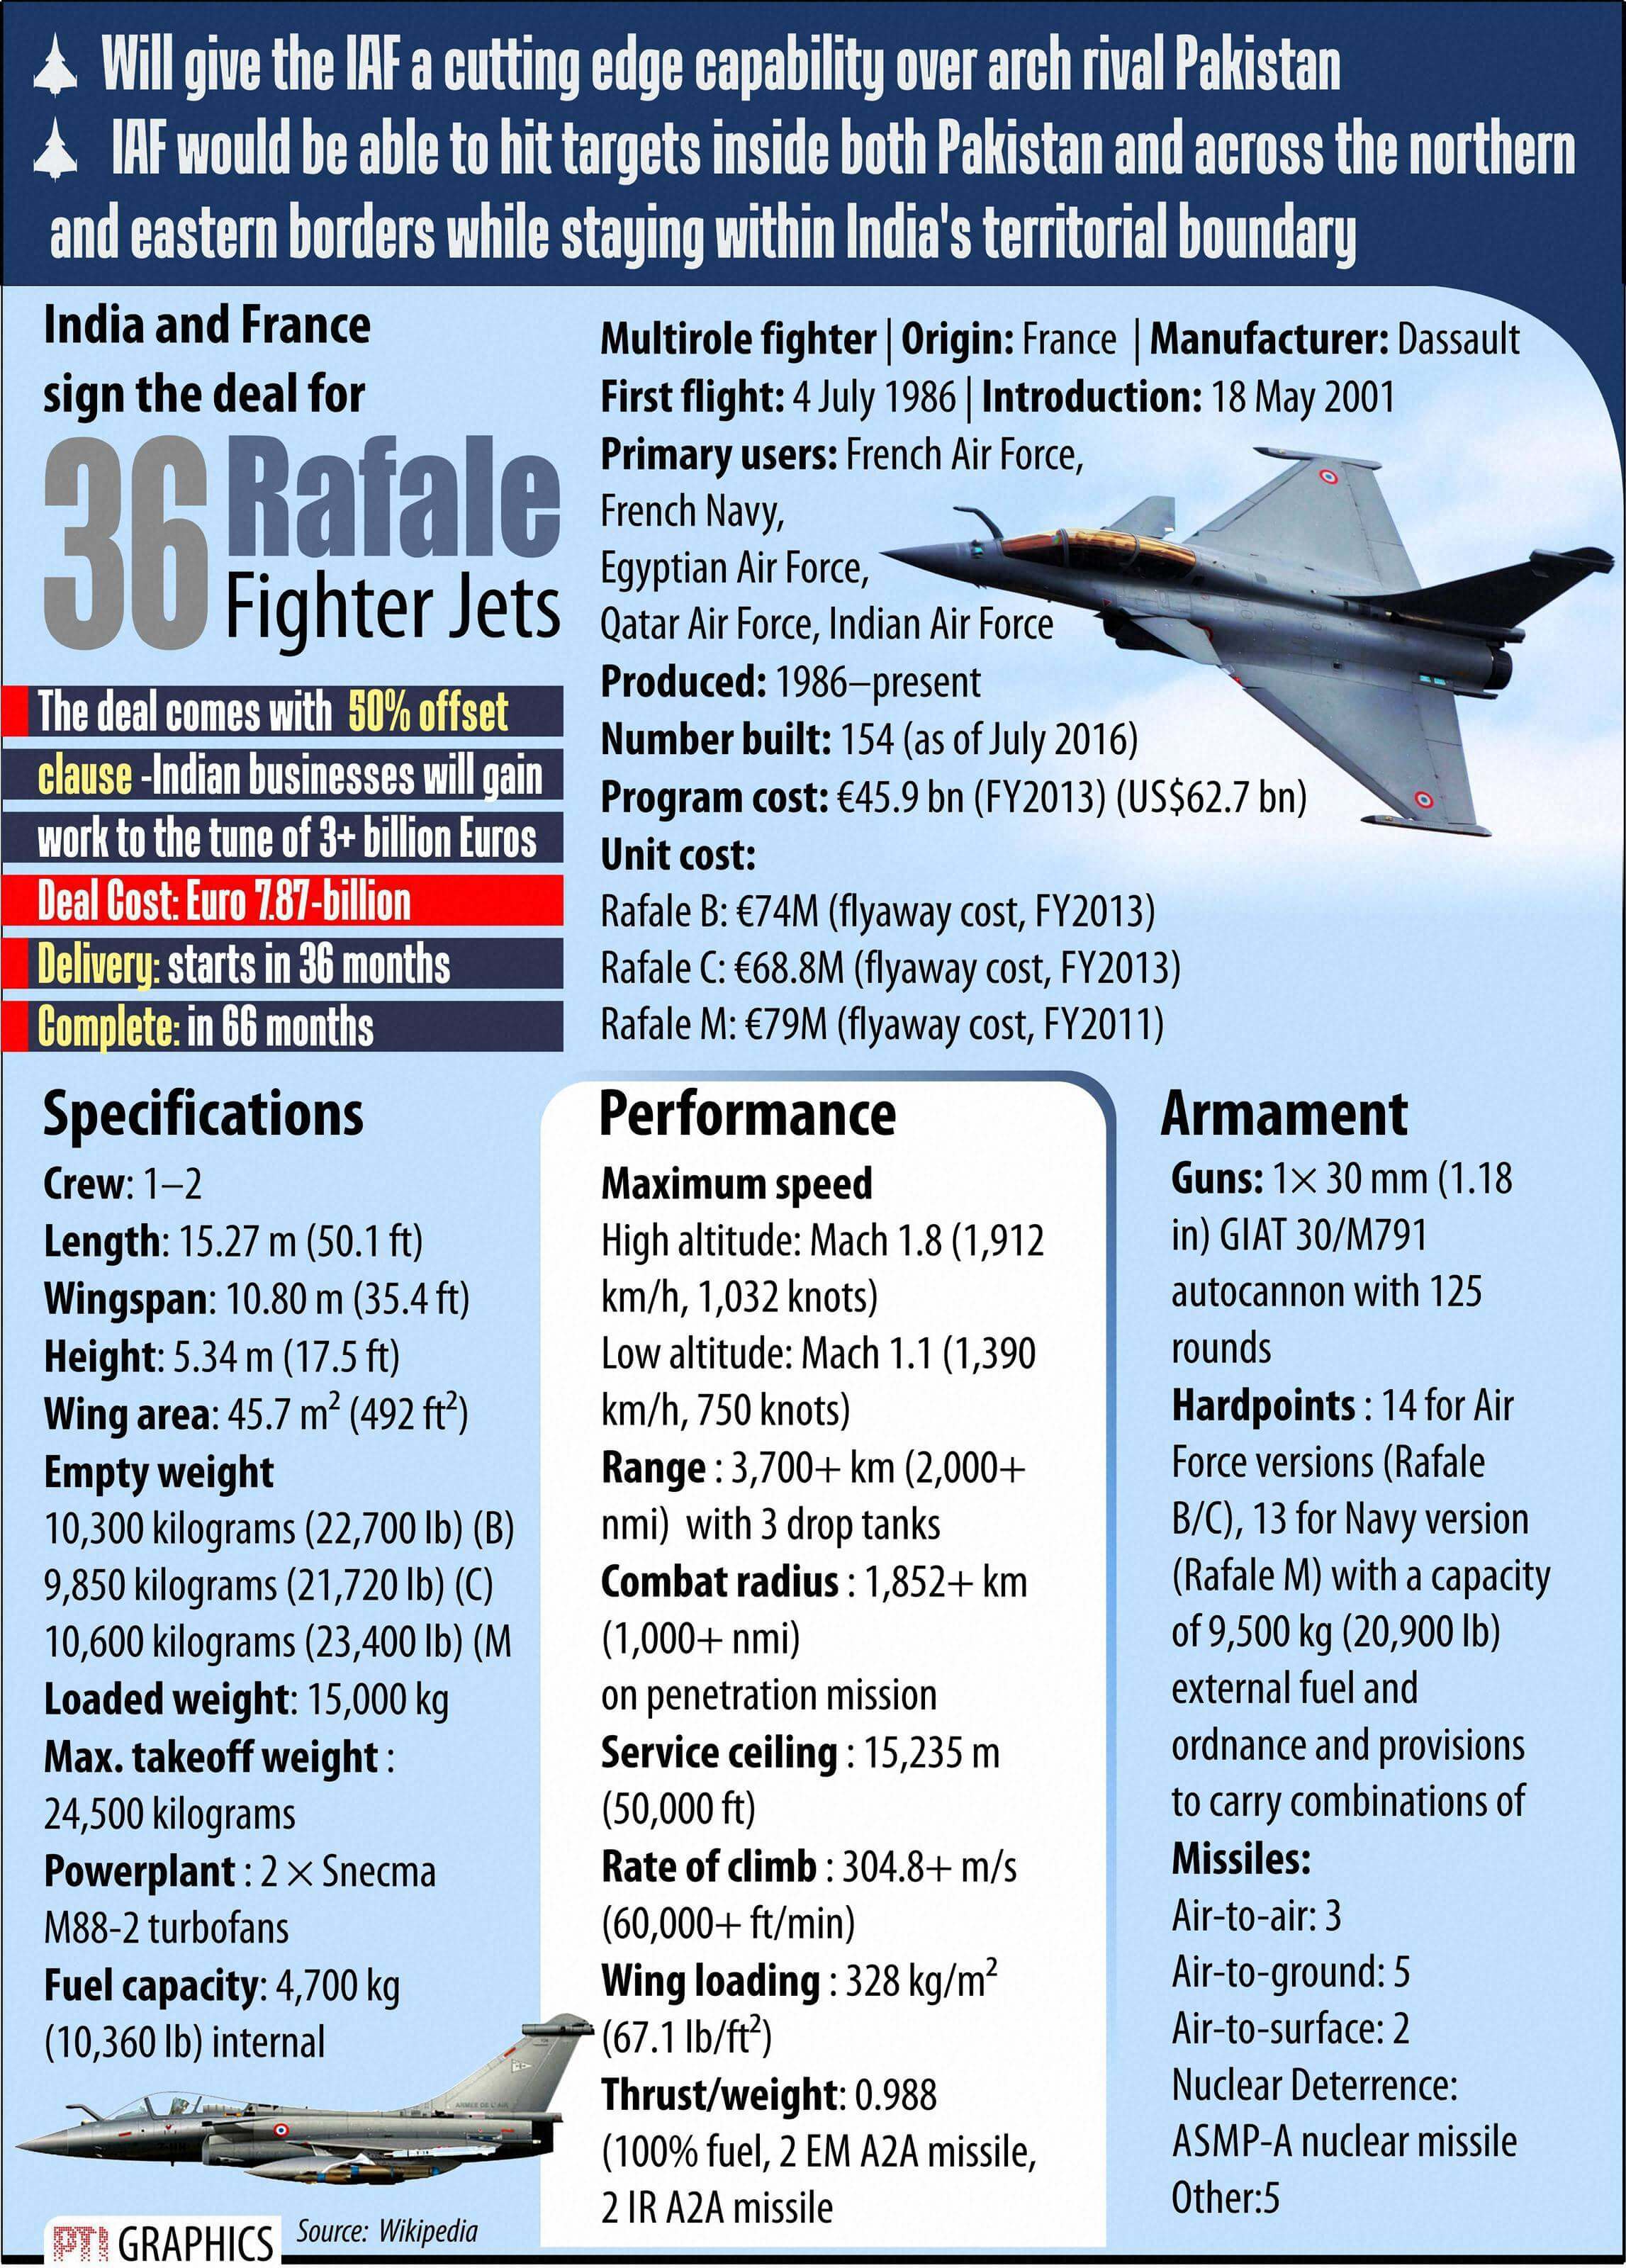 Rafale Or F-16? Comparing India & Pakistan’s Top Fighter Jets